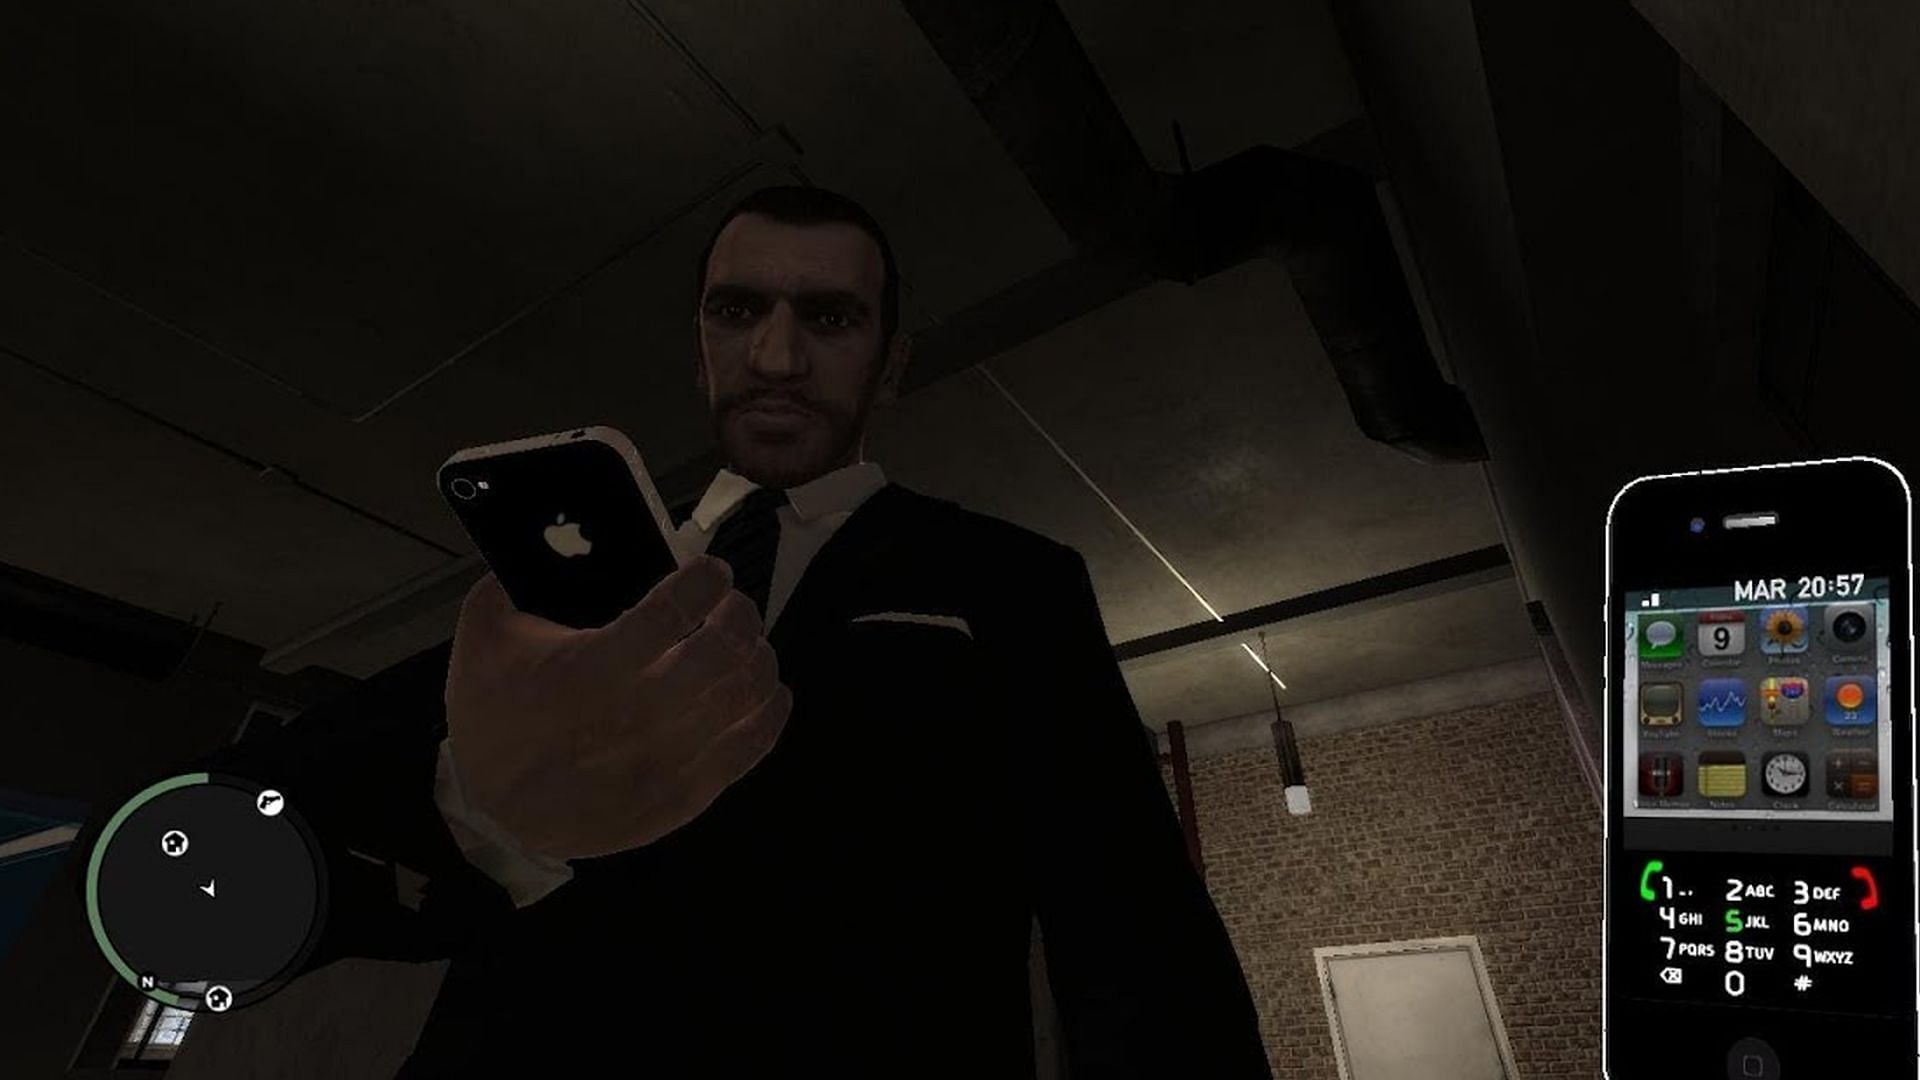 Grand Theft Auto IV Mod apk download - Rockstar GTA 4 MOBILE Edition Android  1.0 free for Android.